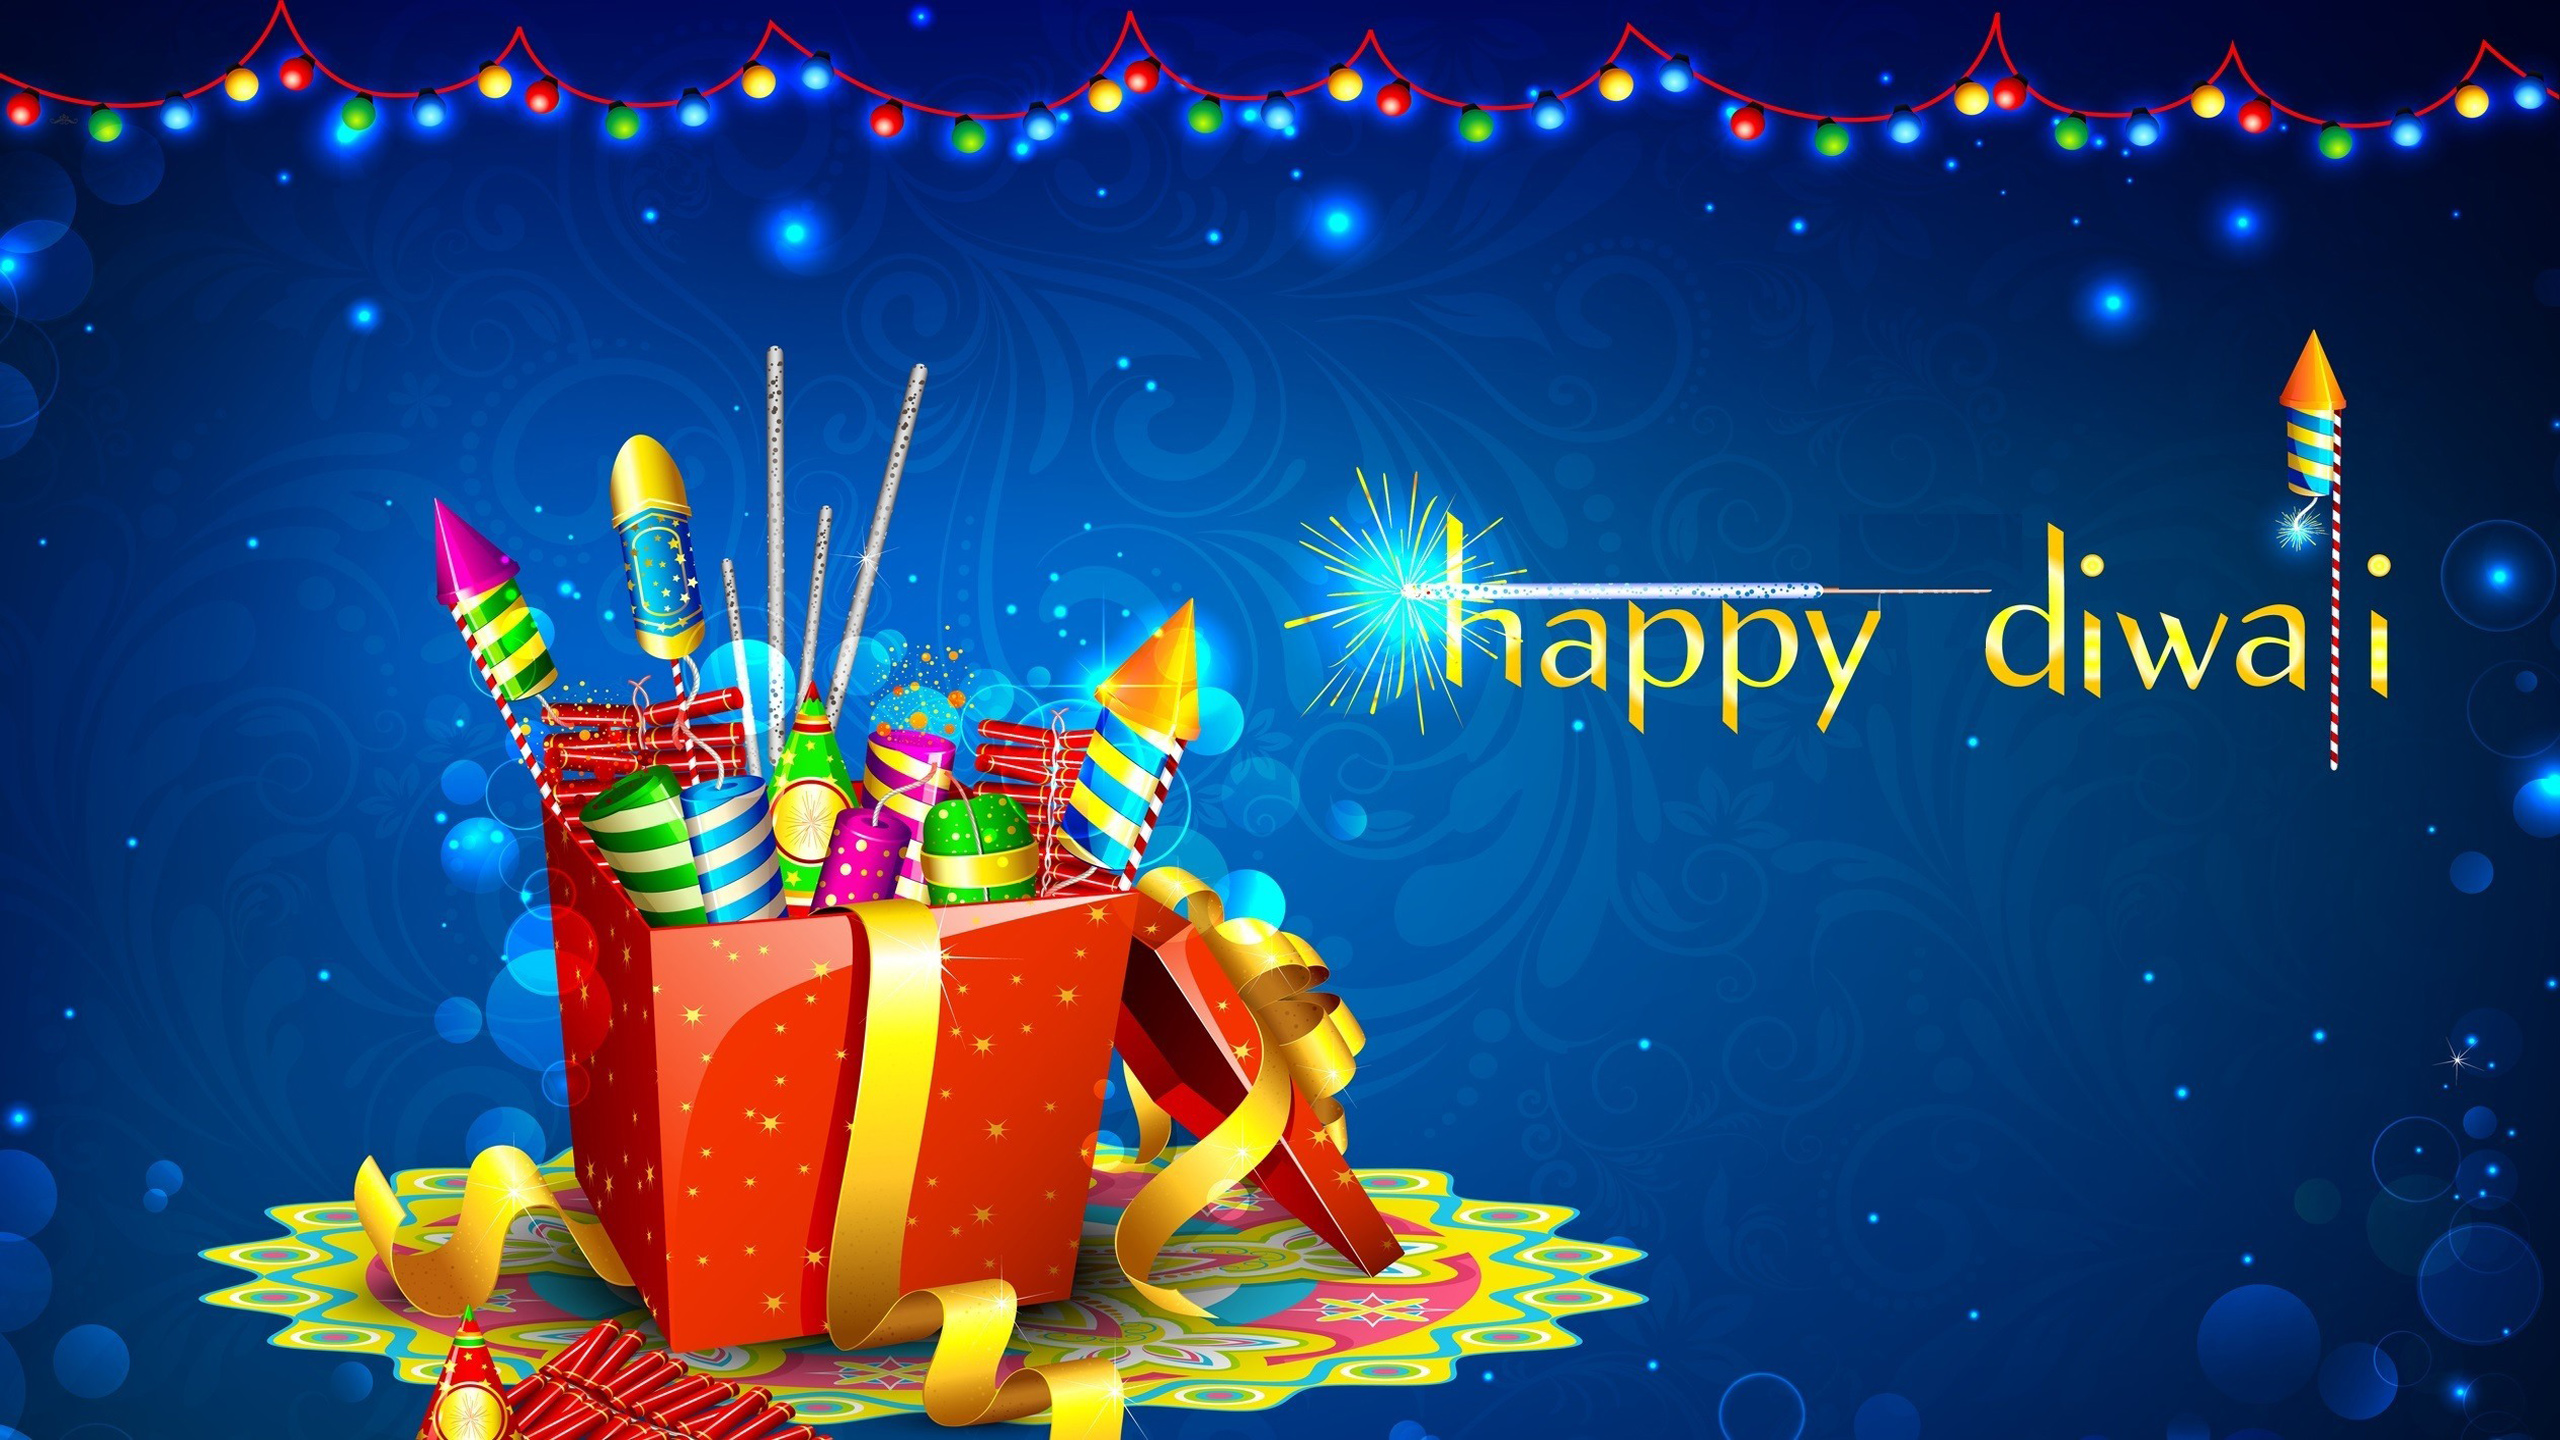 diwali wishes wallpaper,birthday candle,event,holiday,fête